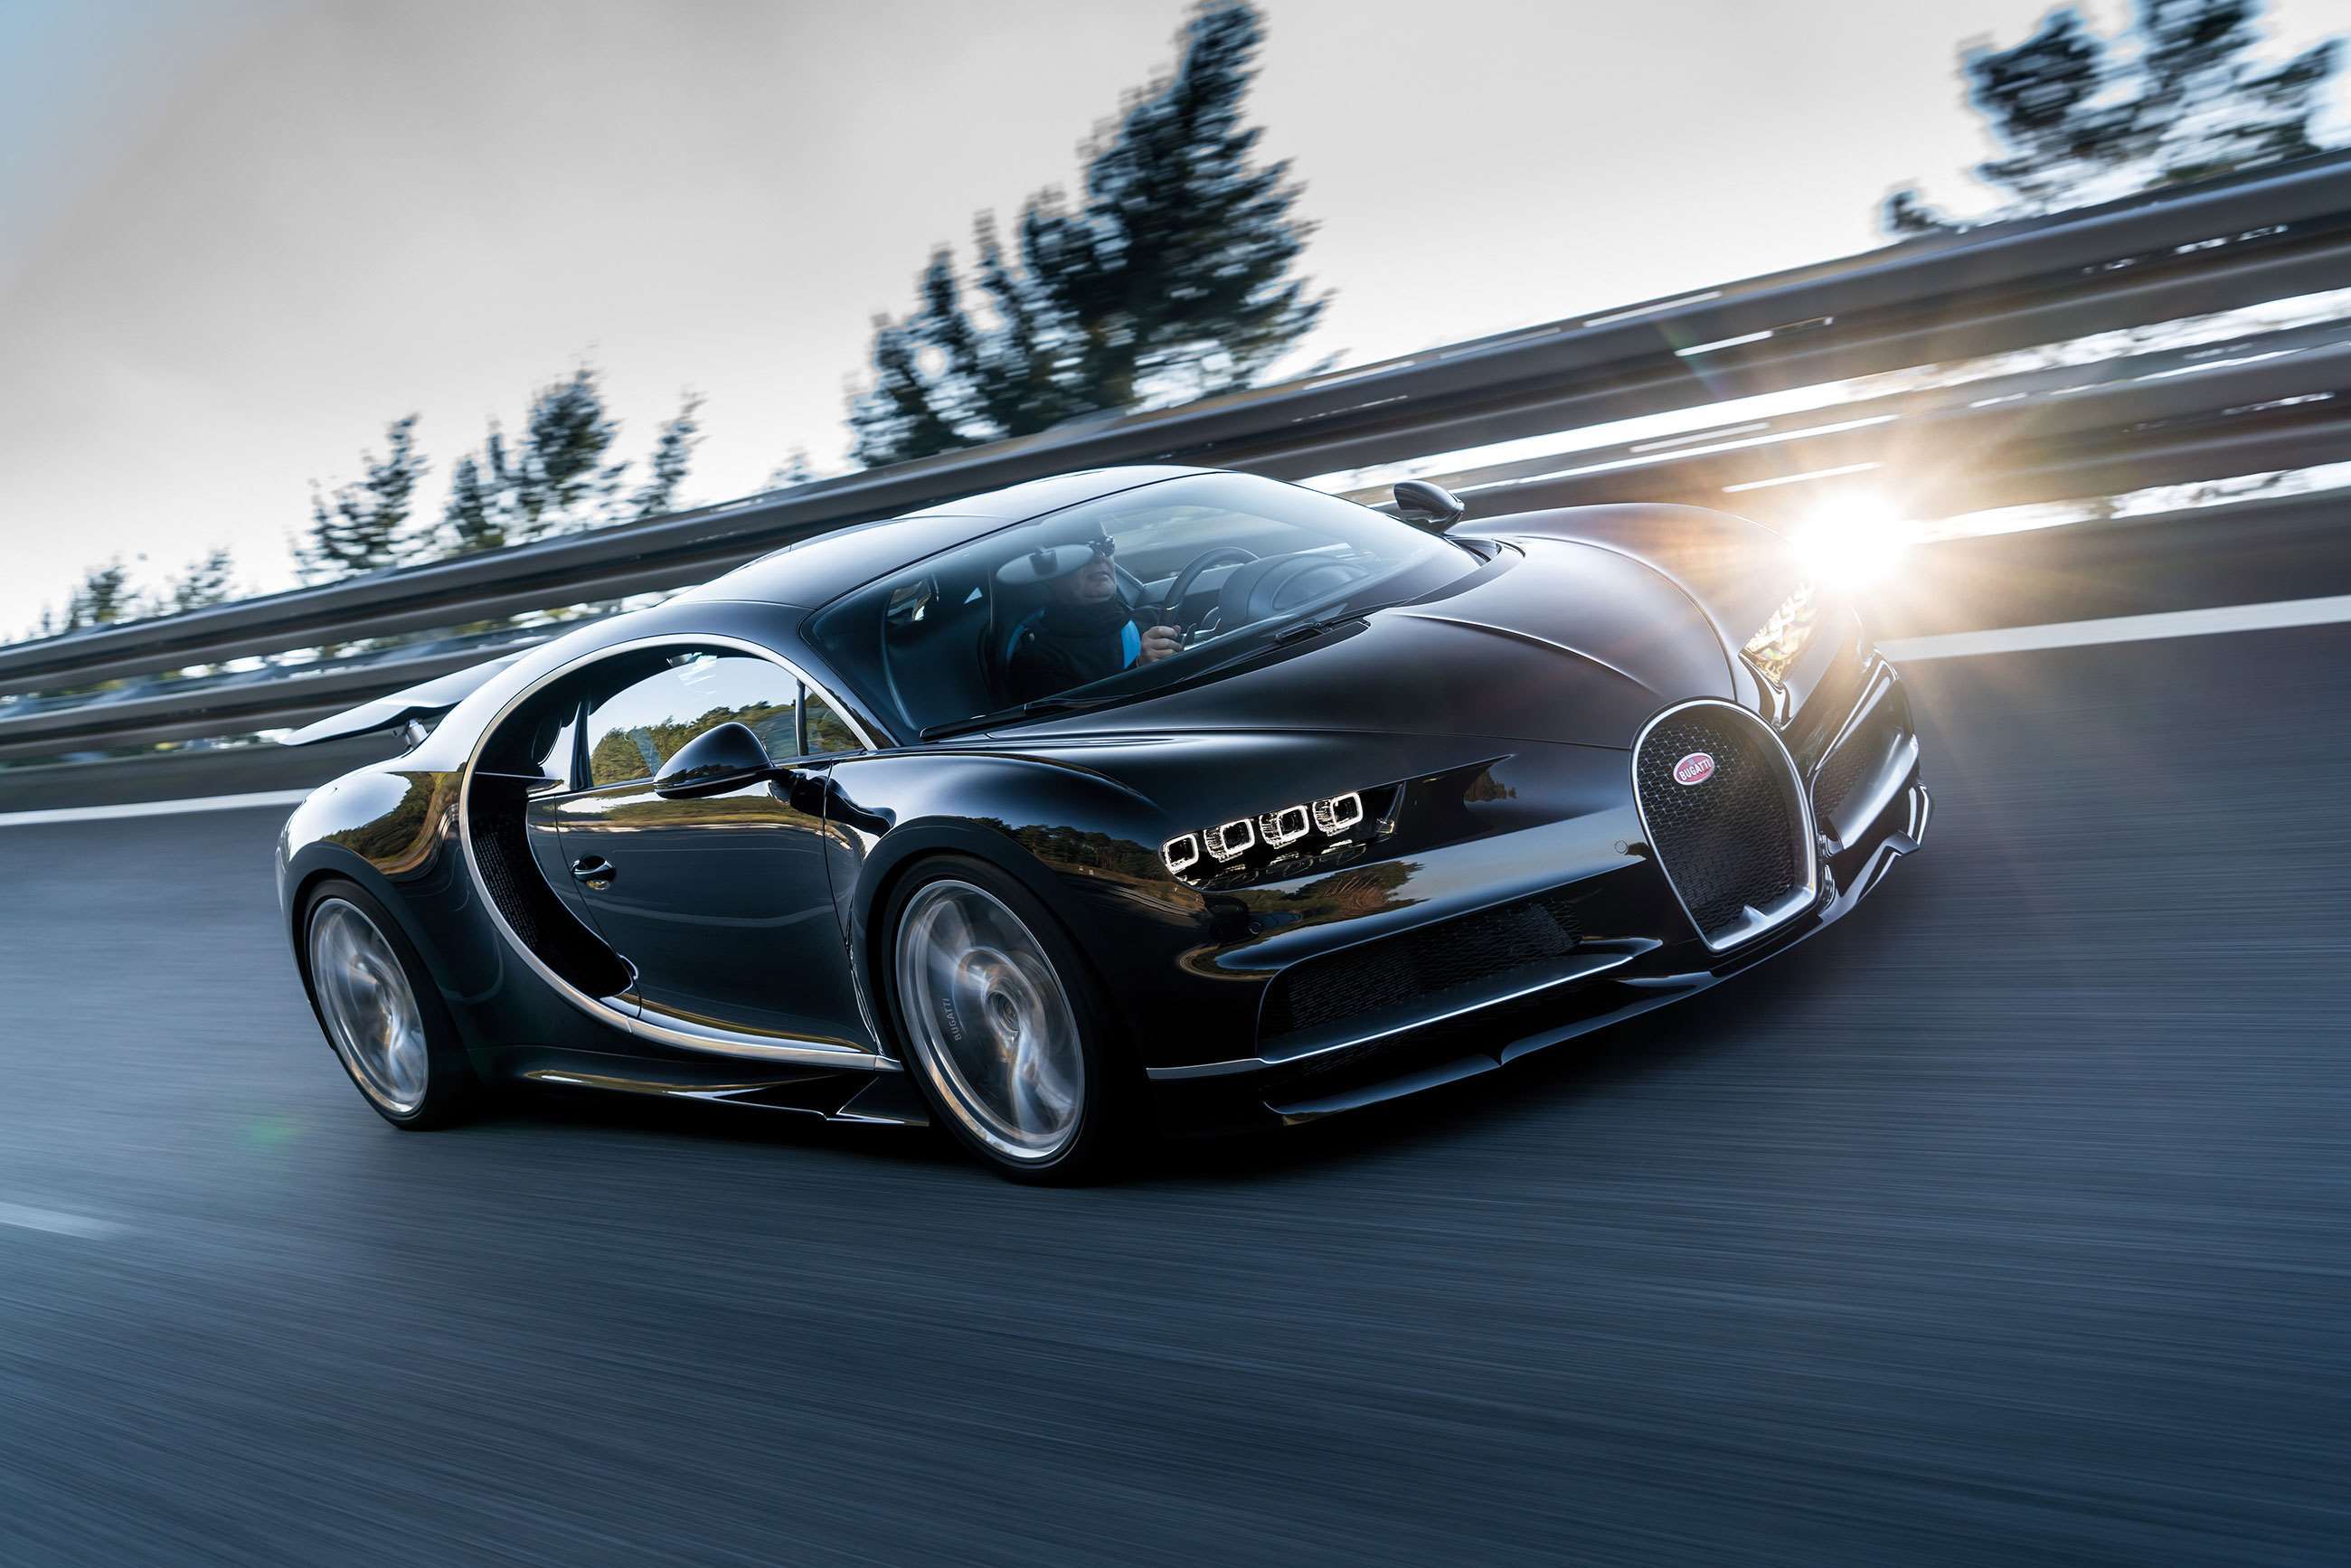 road-cars-with-giant-engines-5-bugatti-chiron-goodwood-26052020.jpg